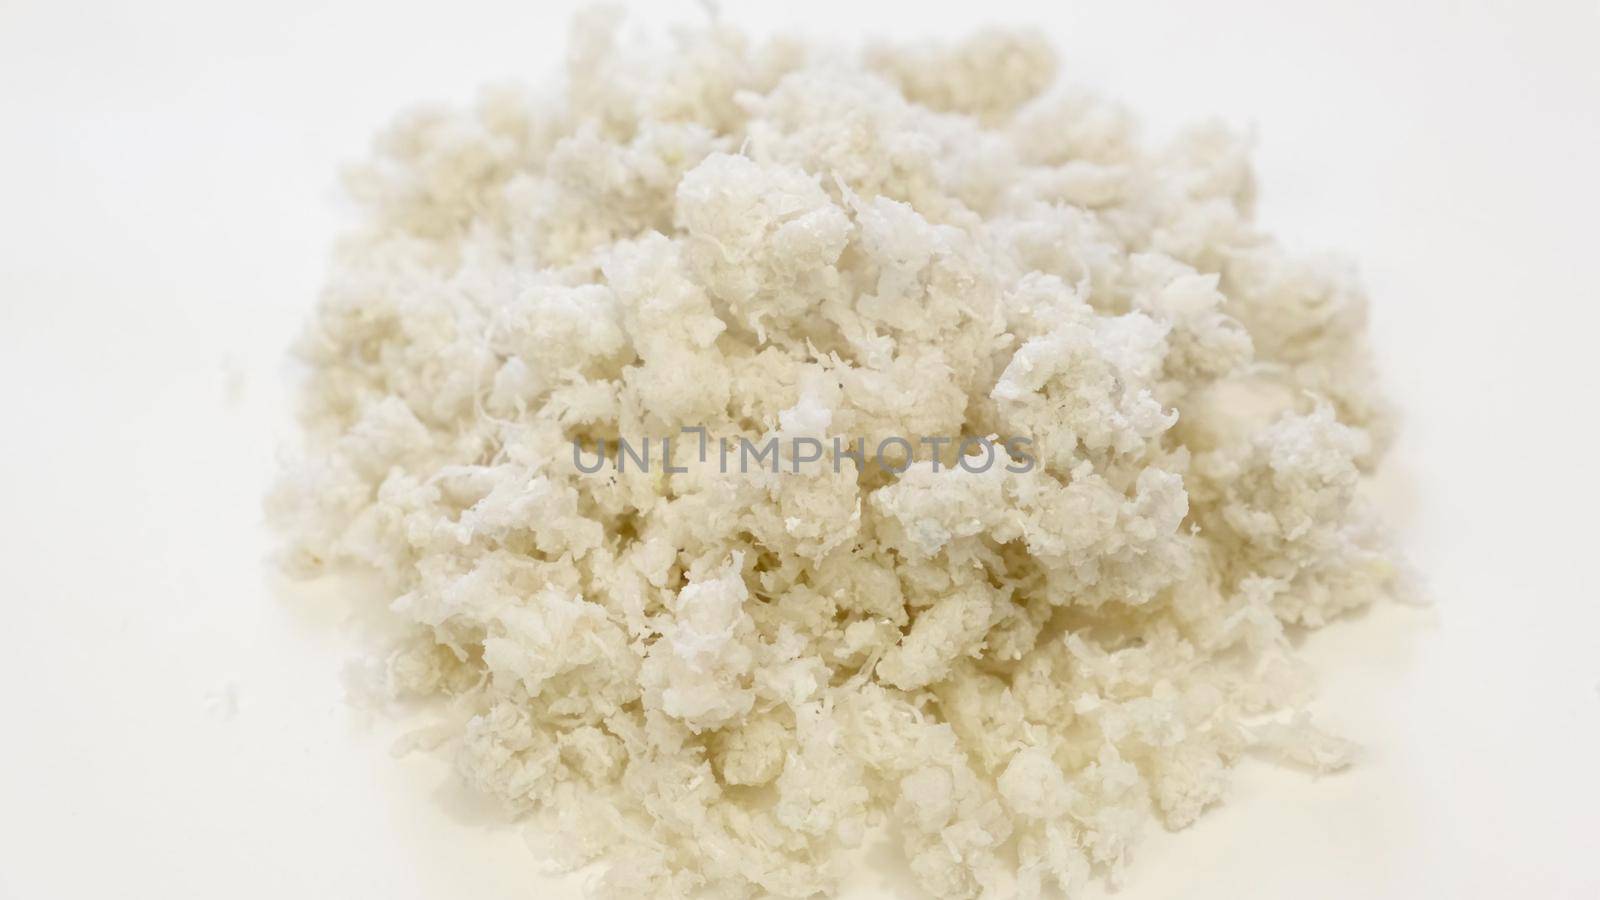 Agglomerate, processing of polypropylene film in the agglomerate. Semi-finished product for the production of granules and raw materials. Plastic recycling concept. PET, HDPE, PVC, LDPE, PP, PS, Other by chelmicky